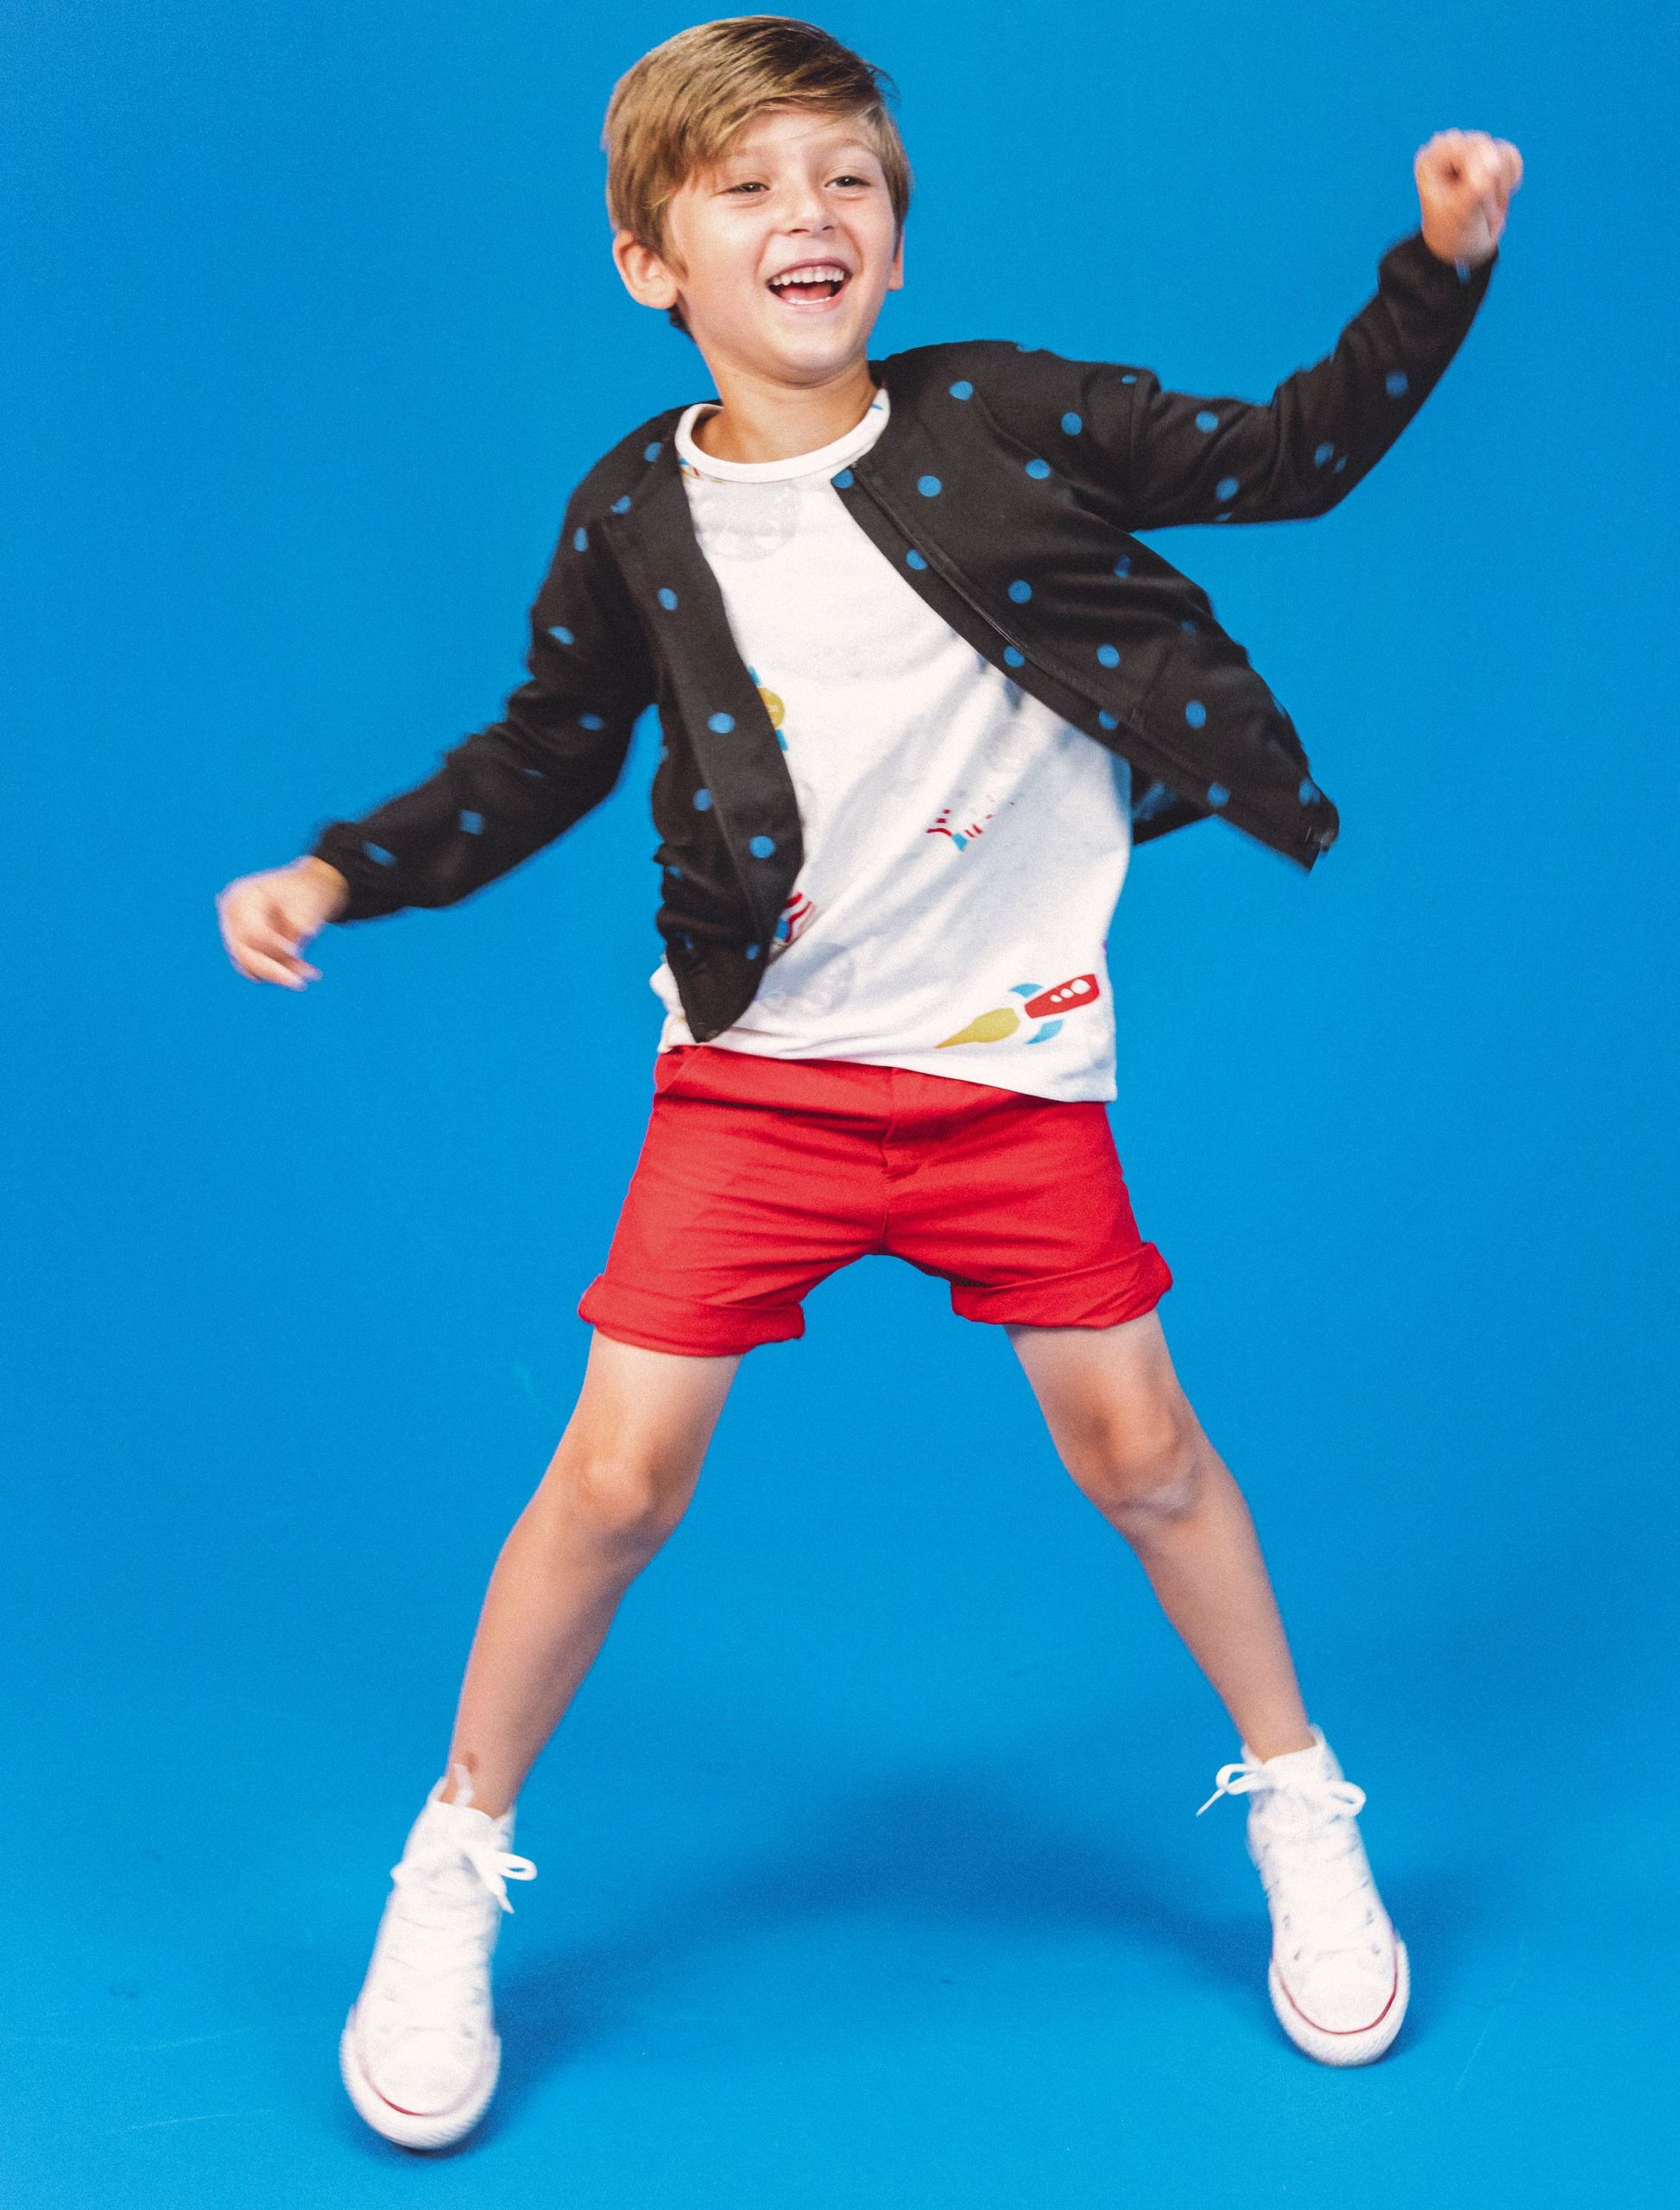 Fashion Classes For Kids
 Win the school year with styles your little guys will love